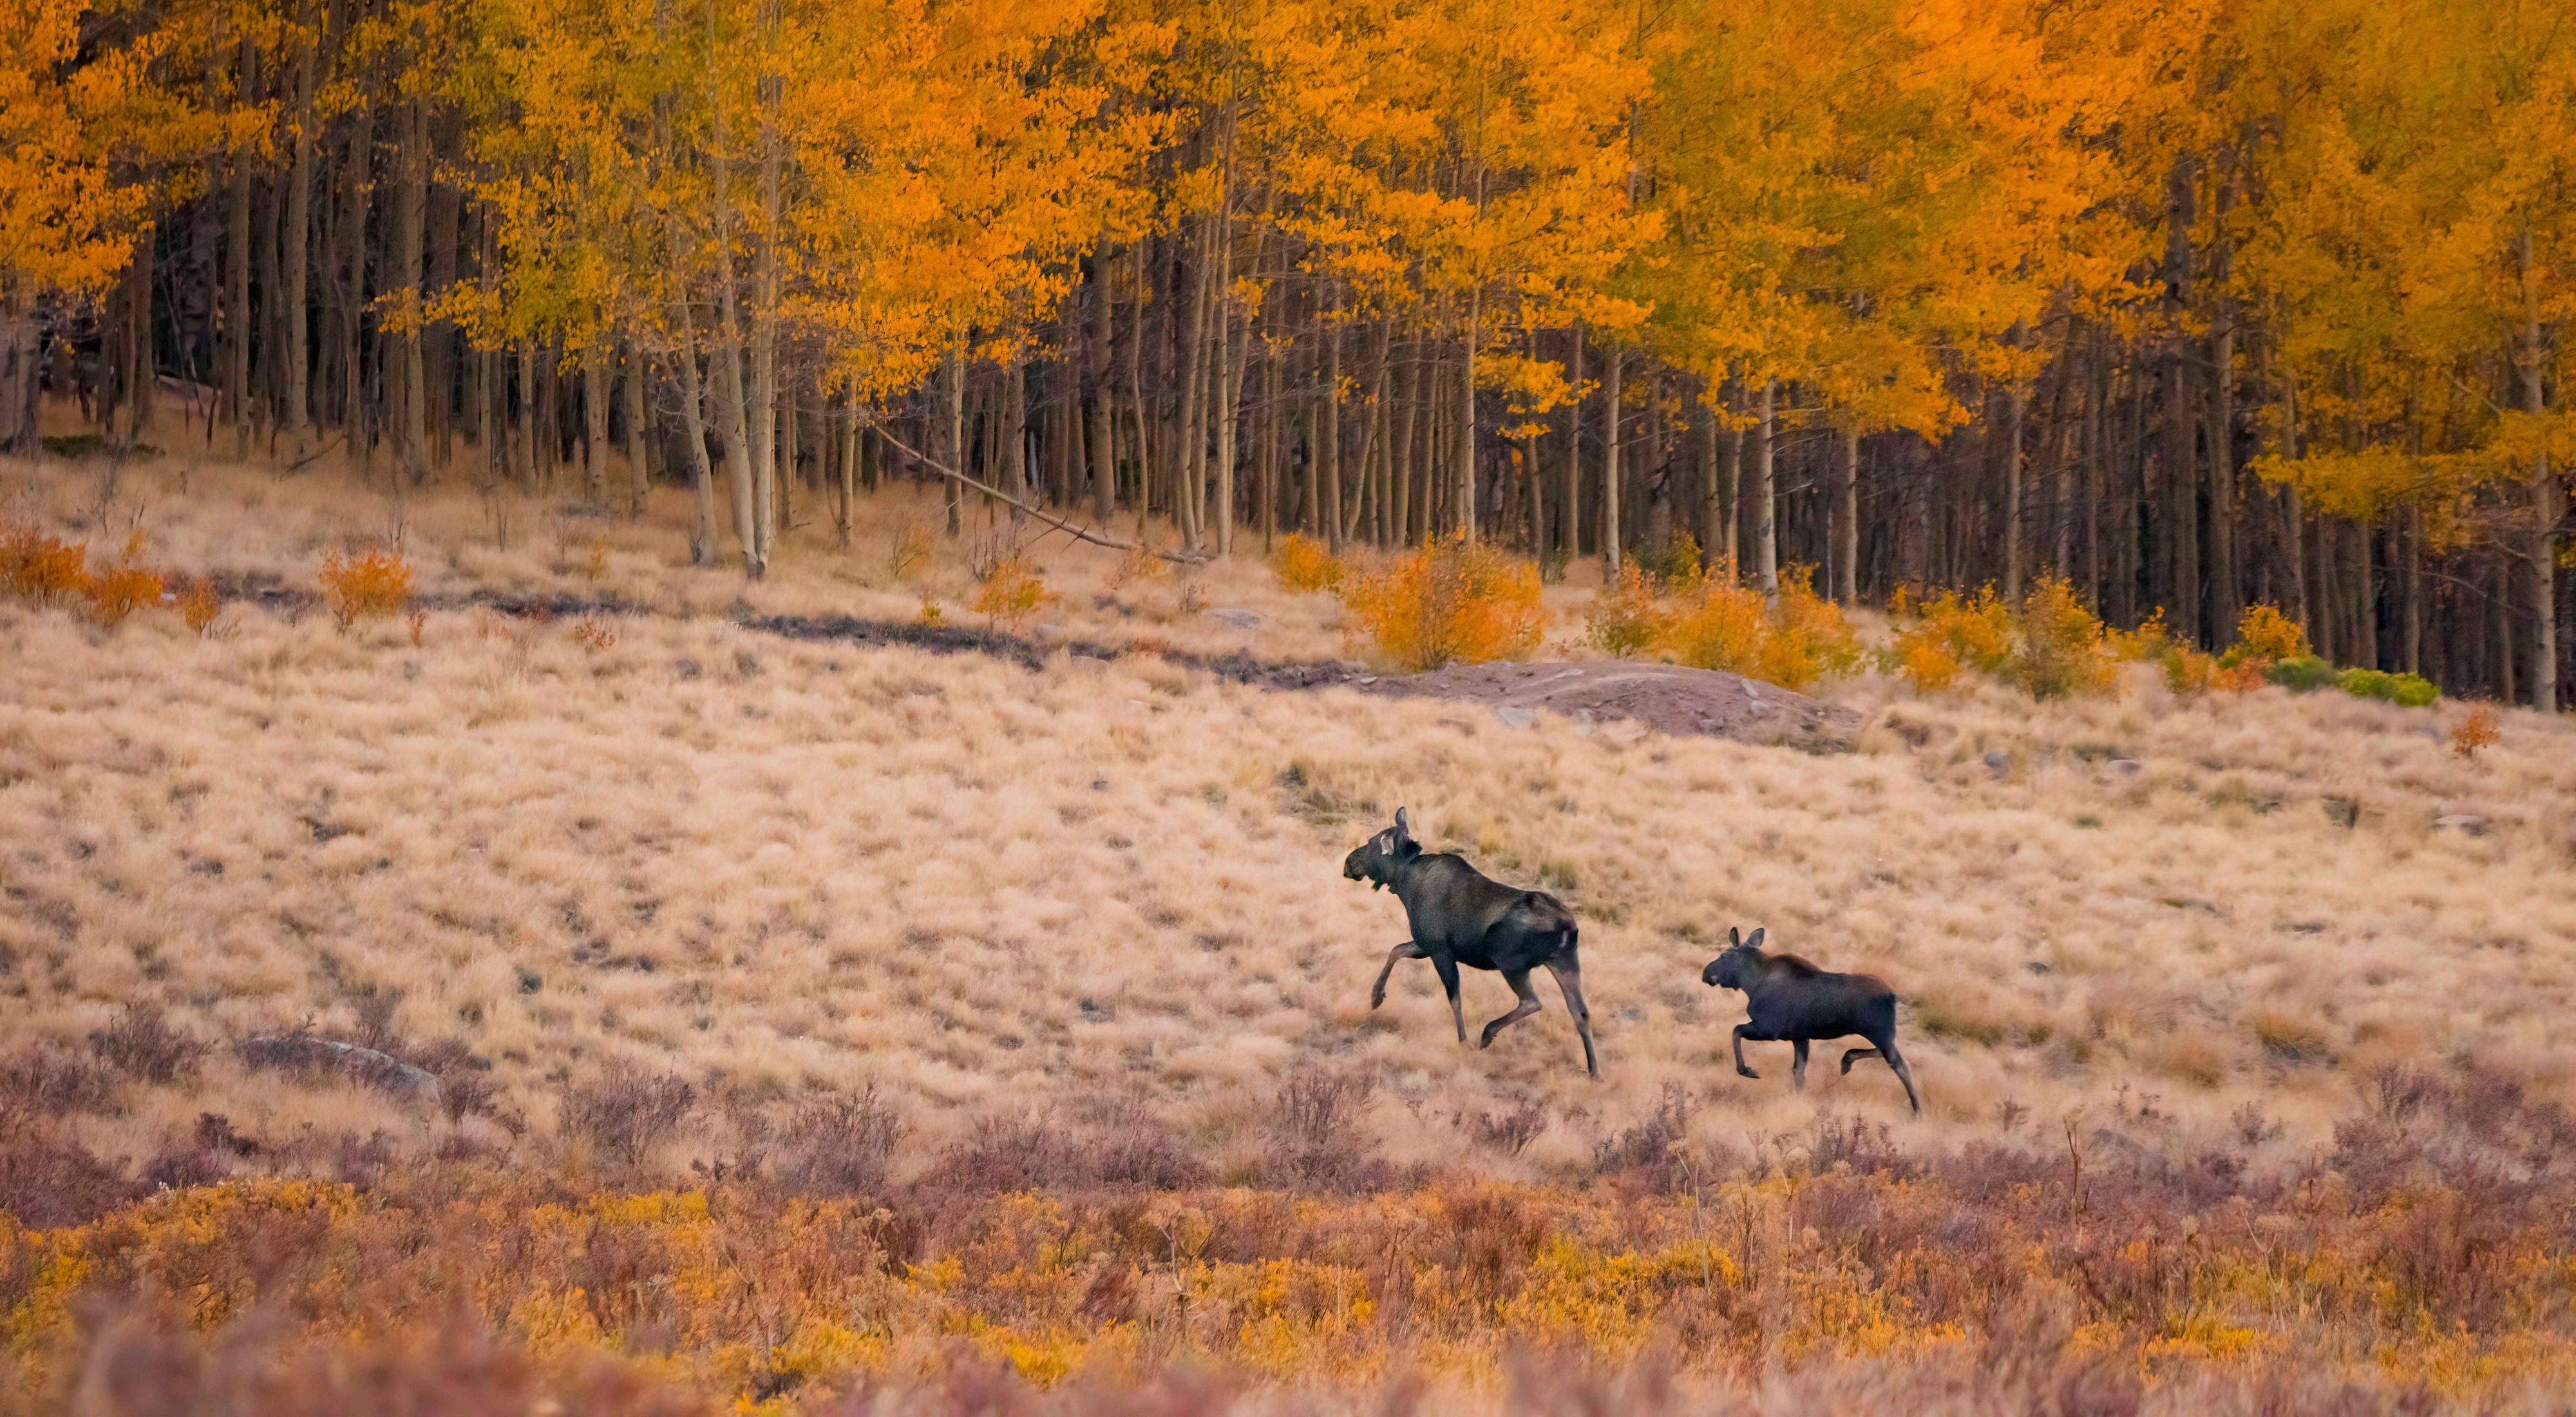 A mother moose walks with her baby into an autumn forest.